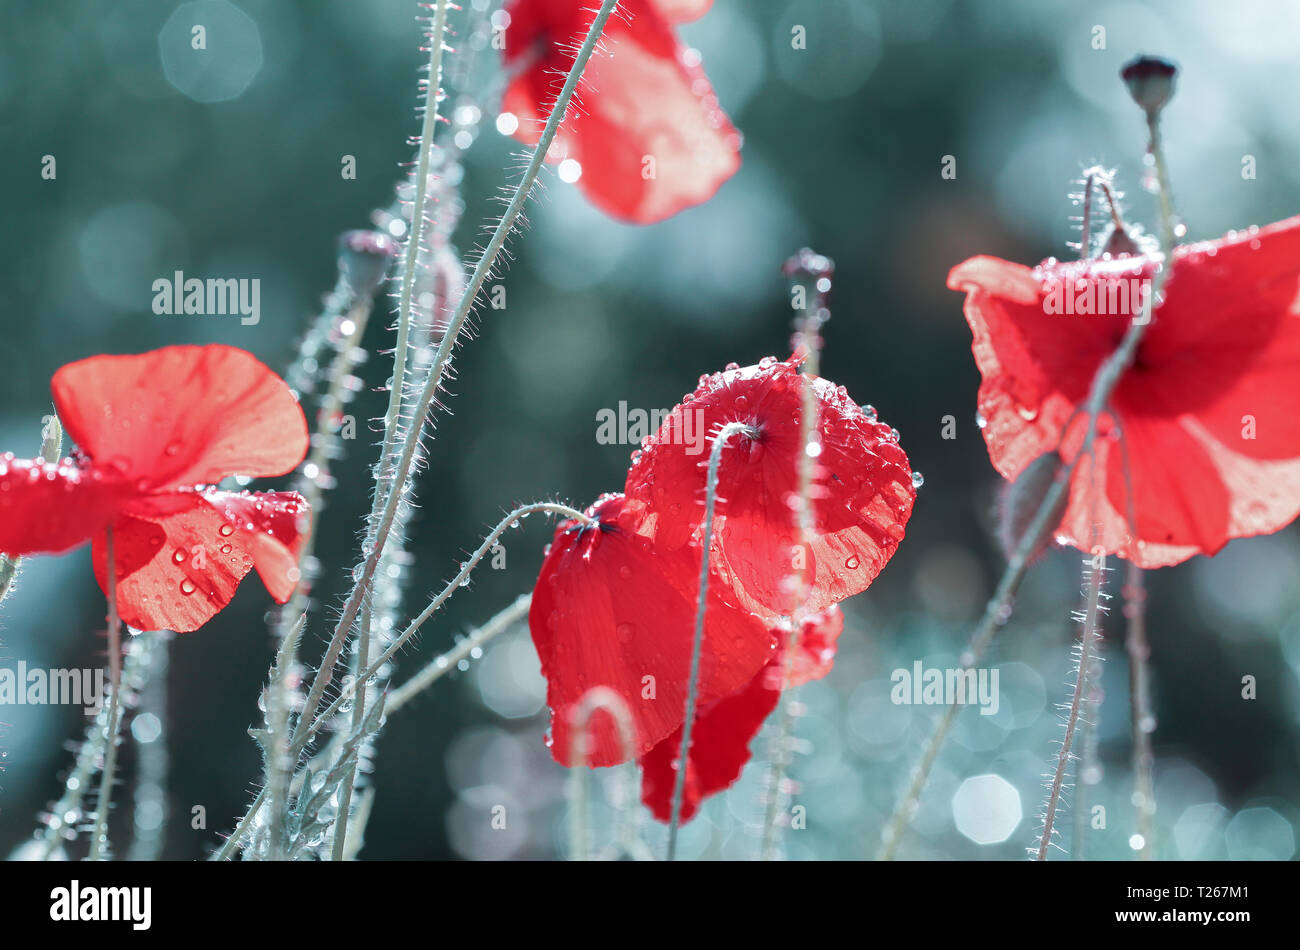 Flower red poppy covered with dew drops on the dark background Stock Photo